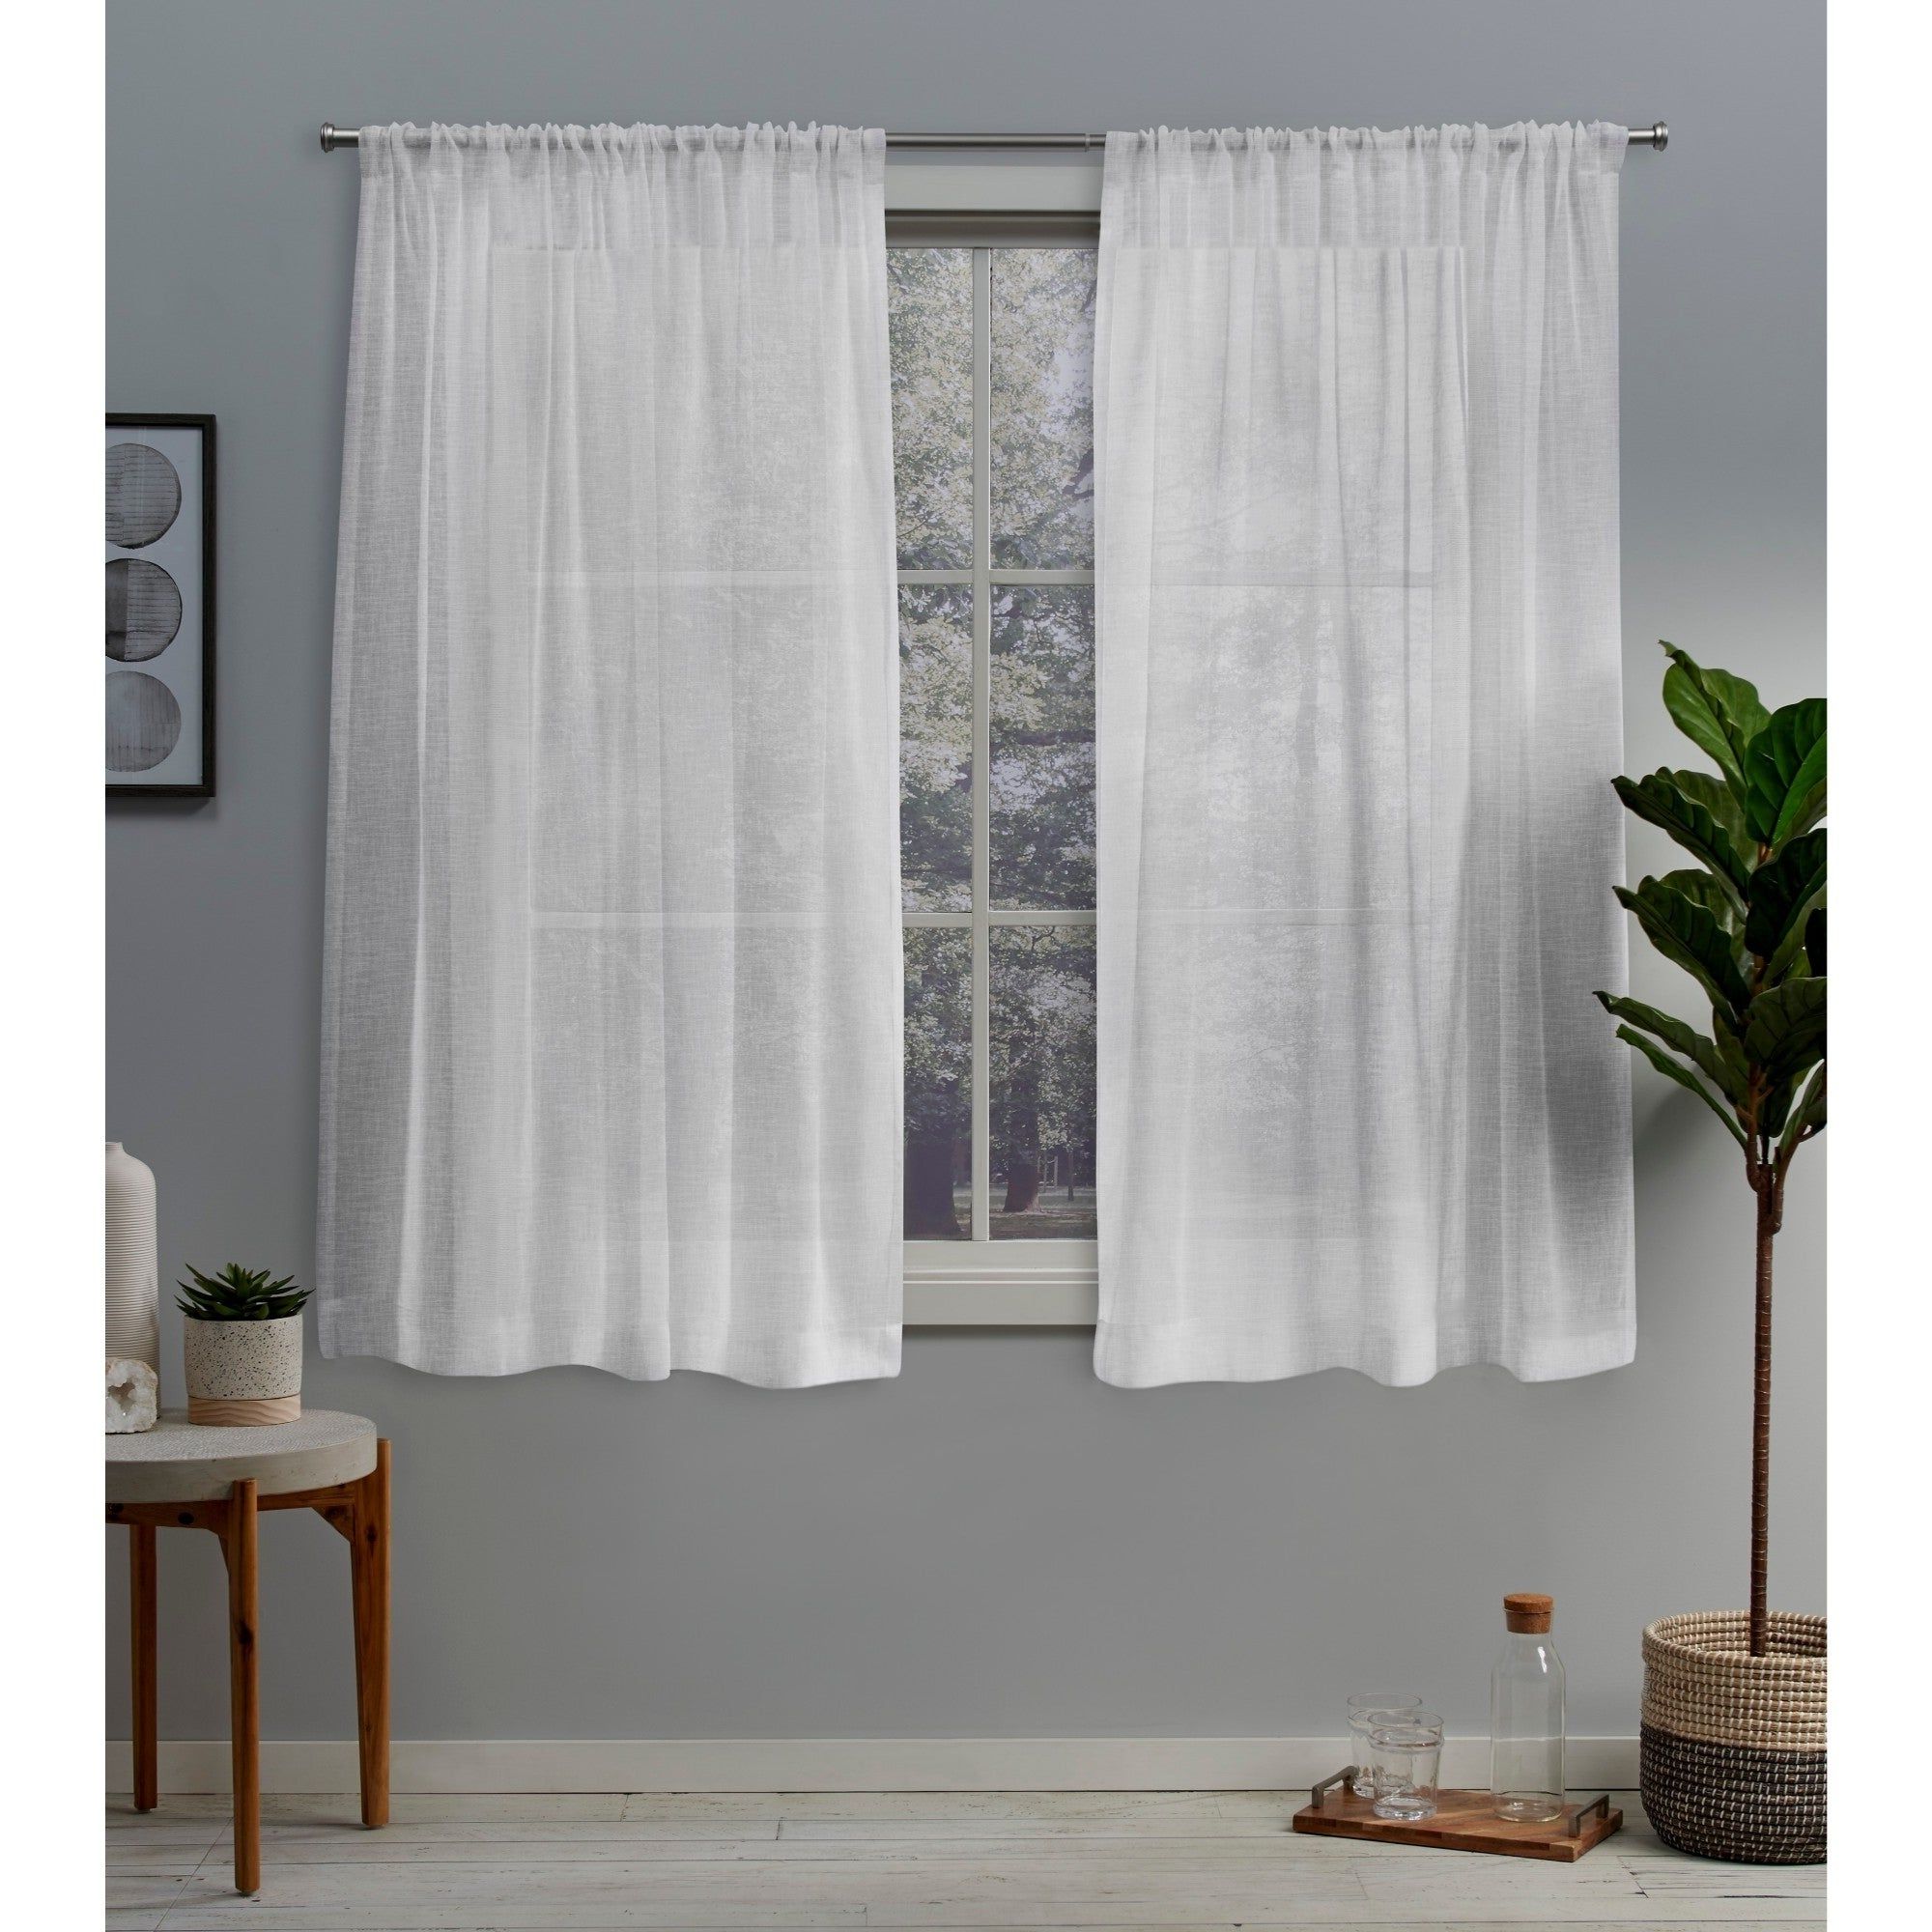 Favorite Ati Home Belgian Sheer Window Curtain Panel Pair With Rod Pocket Intended For Belgian Sheer Window Curtain Panel Pairs With Rod Pocket (View 5 of 20)